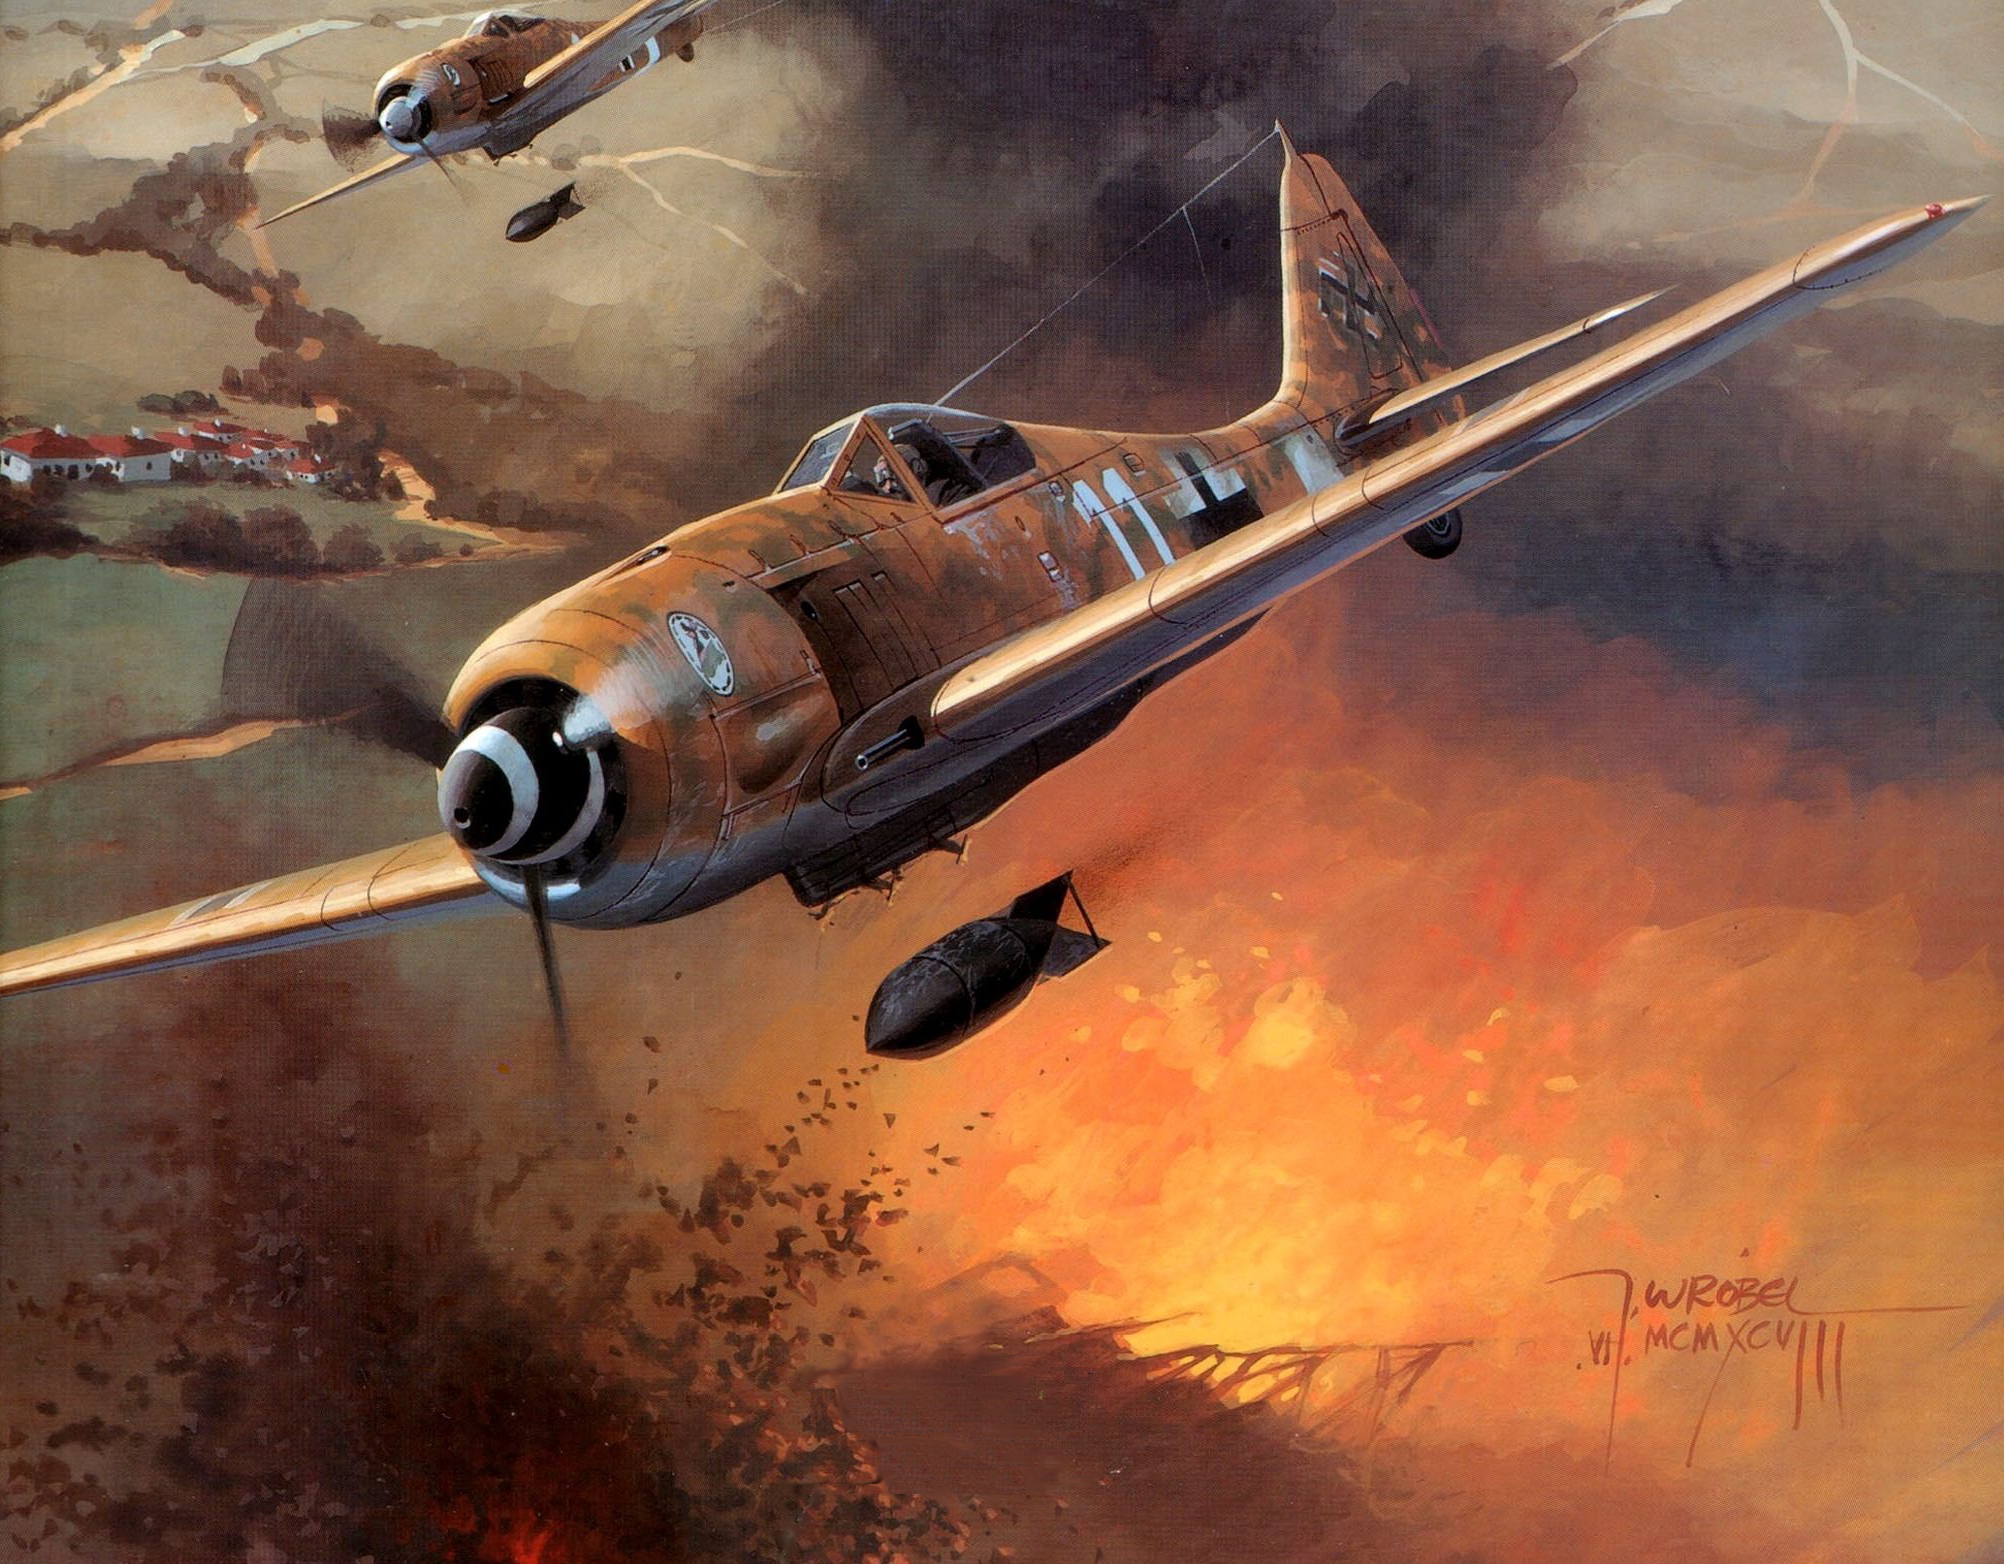 Wwii Aviation Artwork Gallery Atomic Toasters